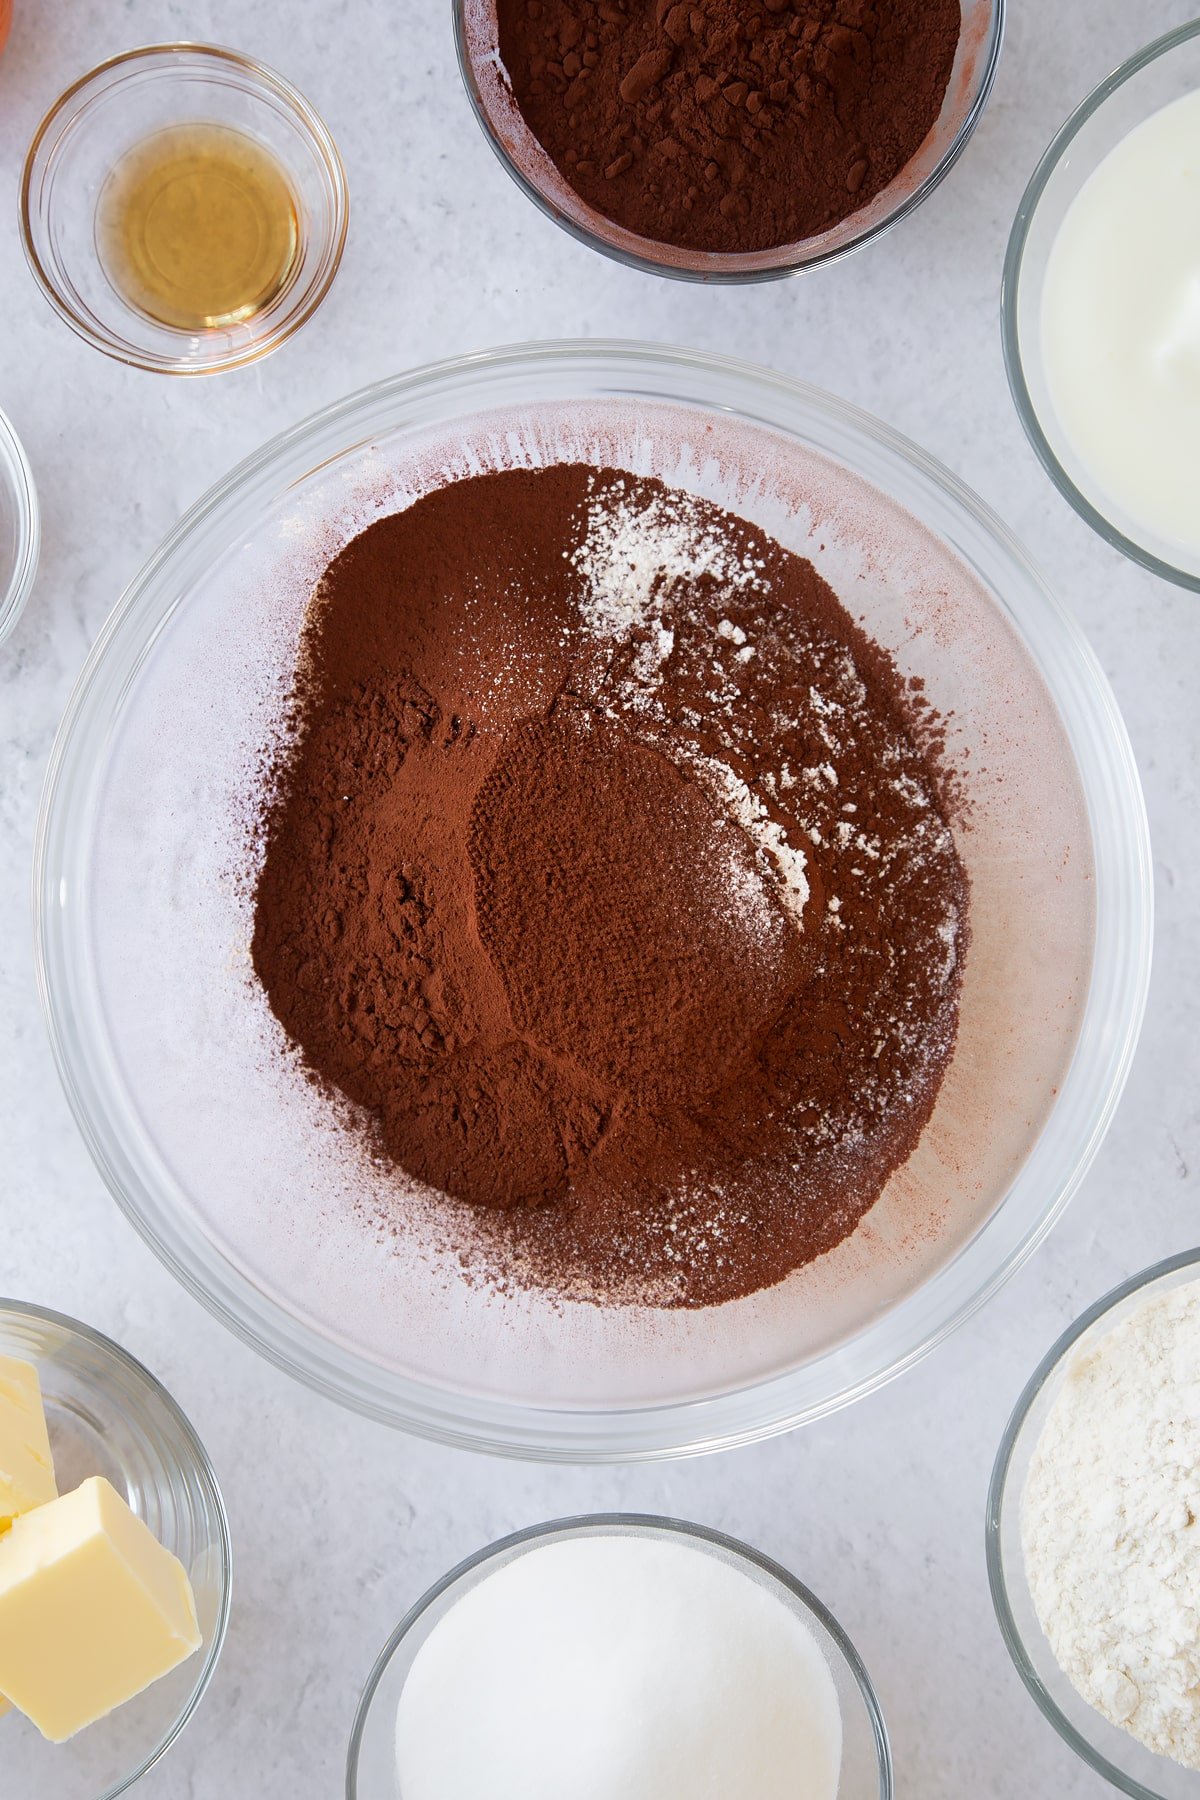 flour, cocoa powder and baking powder in a large clear bowl.